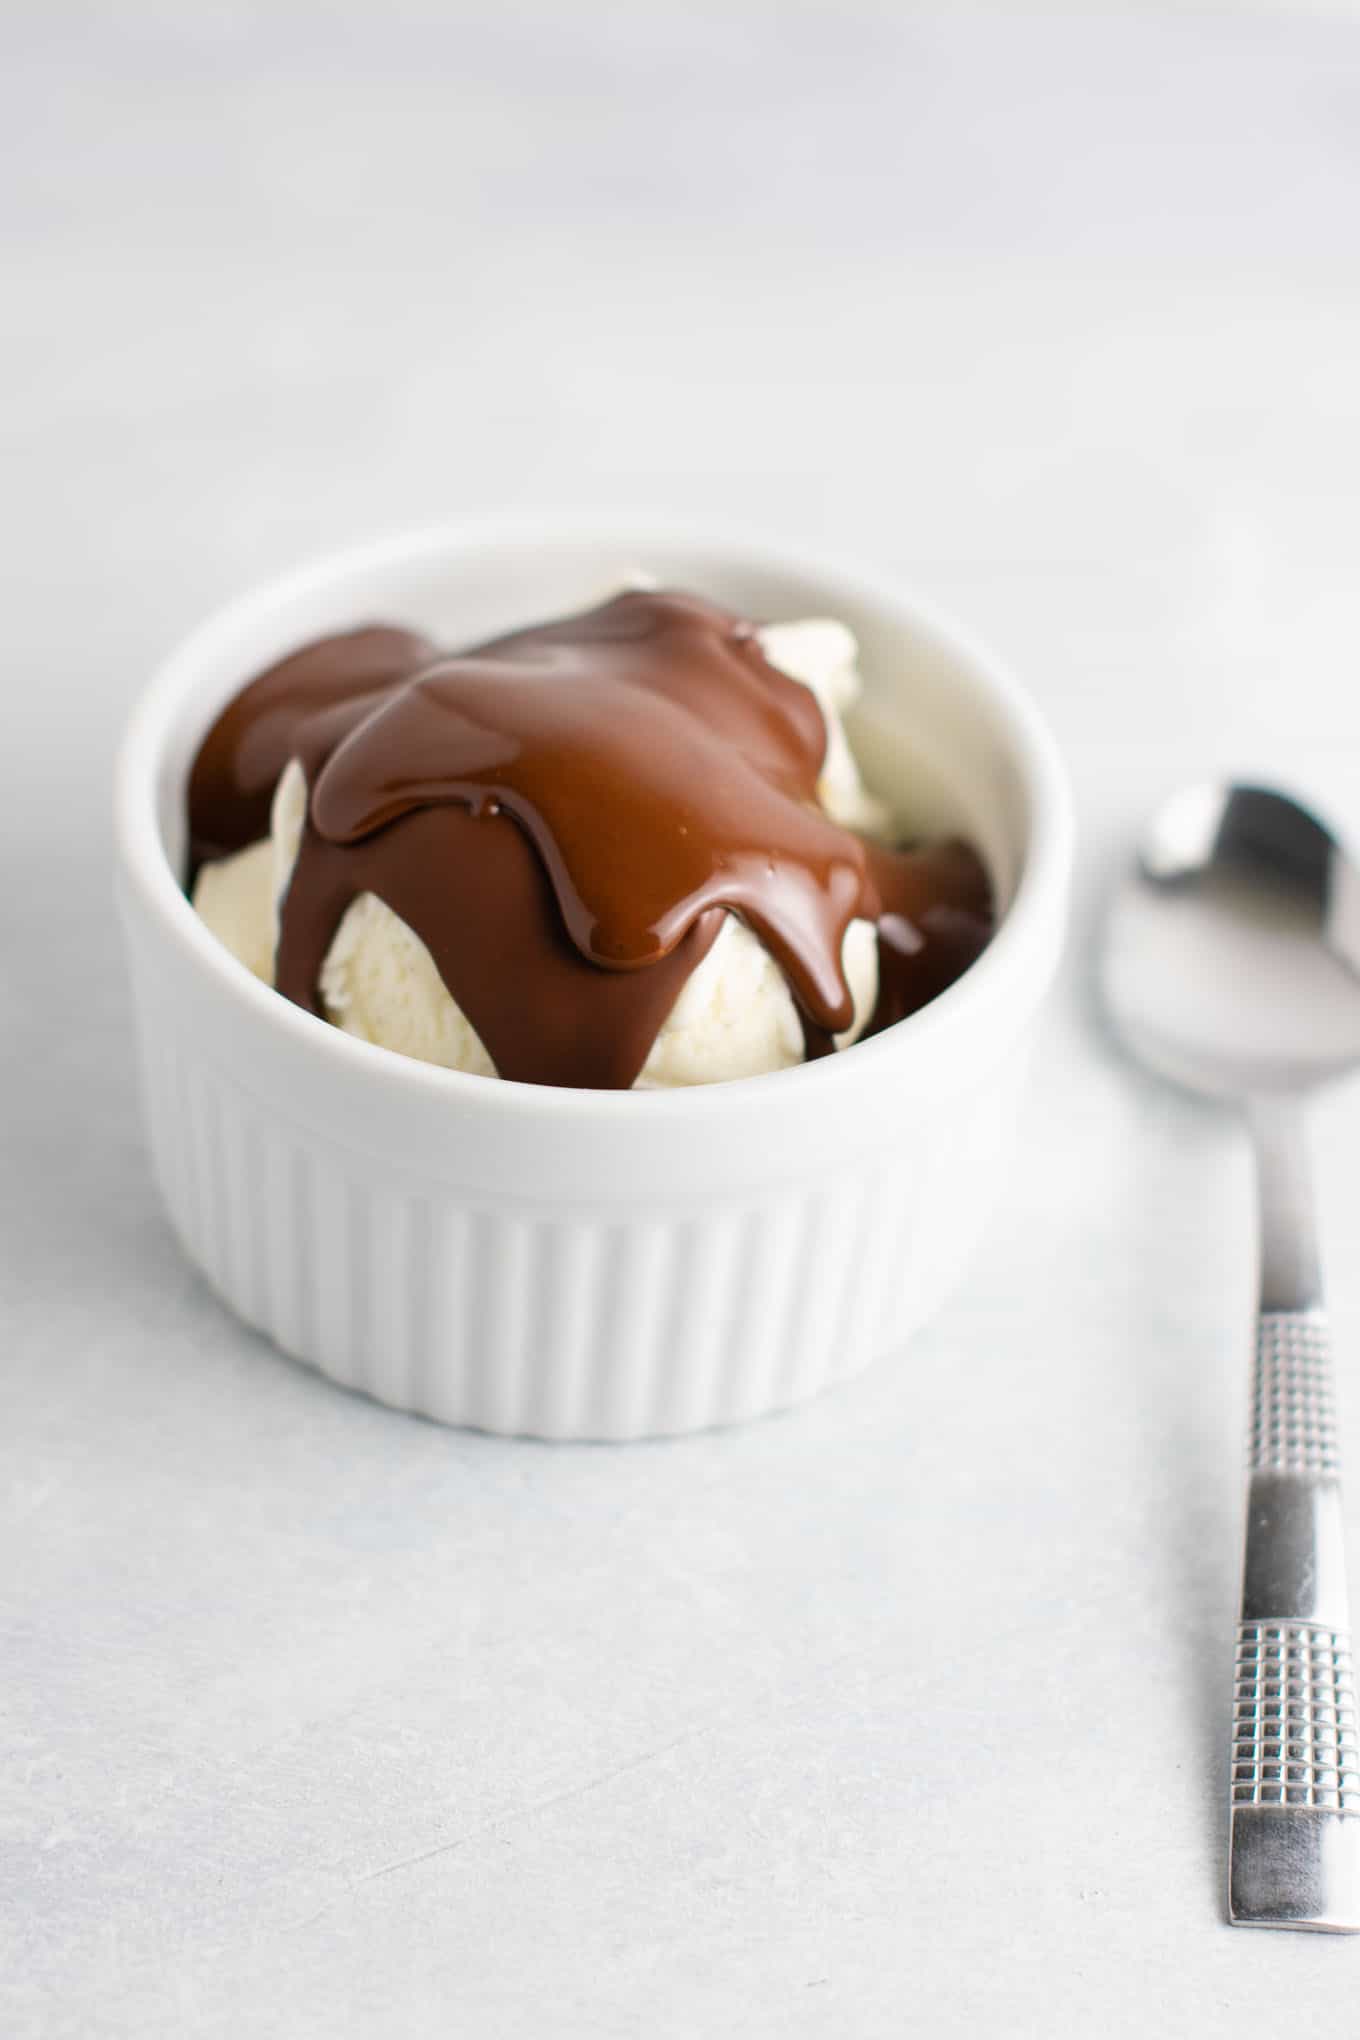 Easy chocolate shell made with just 3 ingredients. Pour over your favorite ice cream for a special treat!